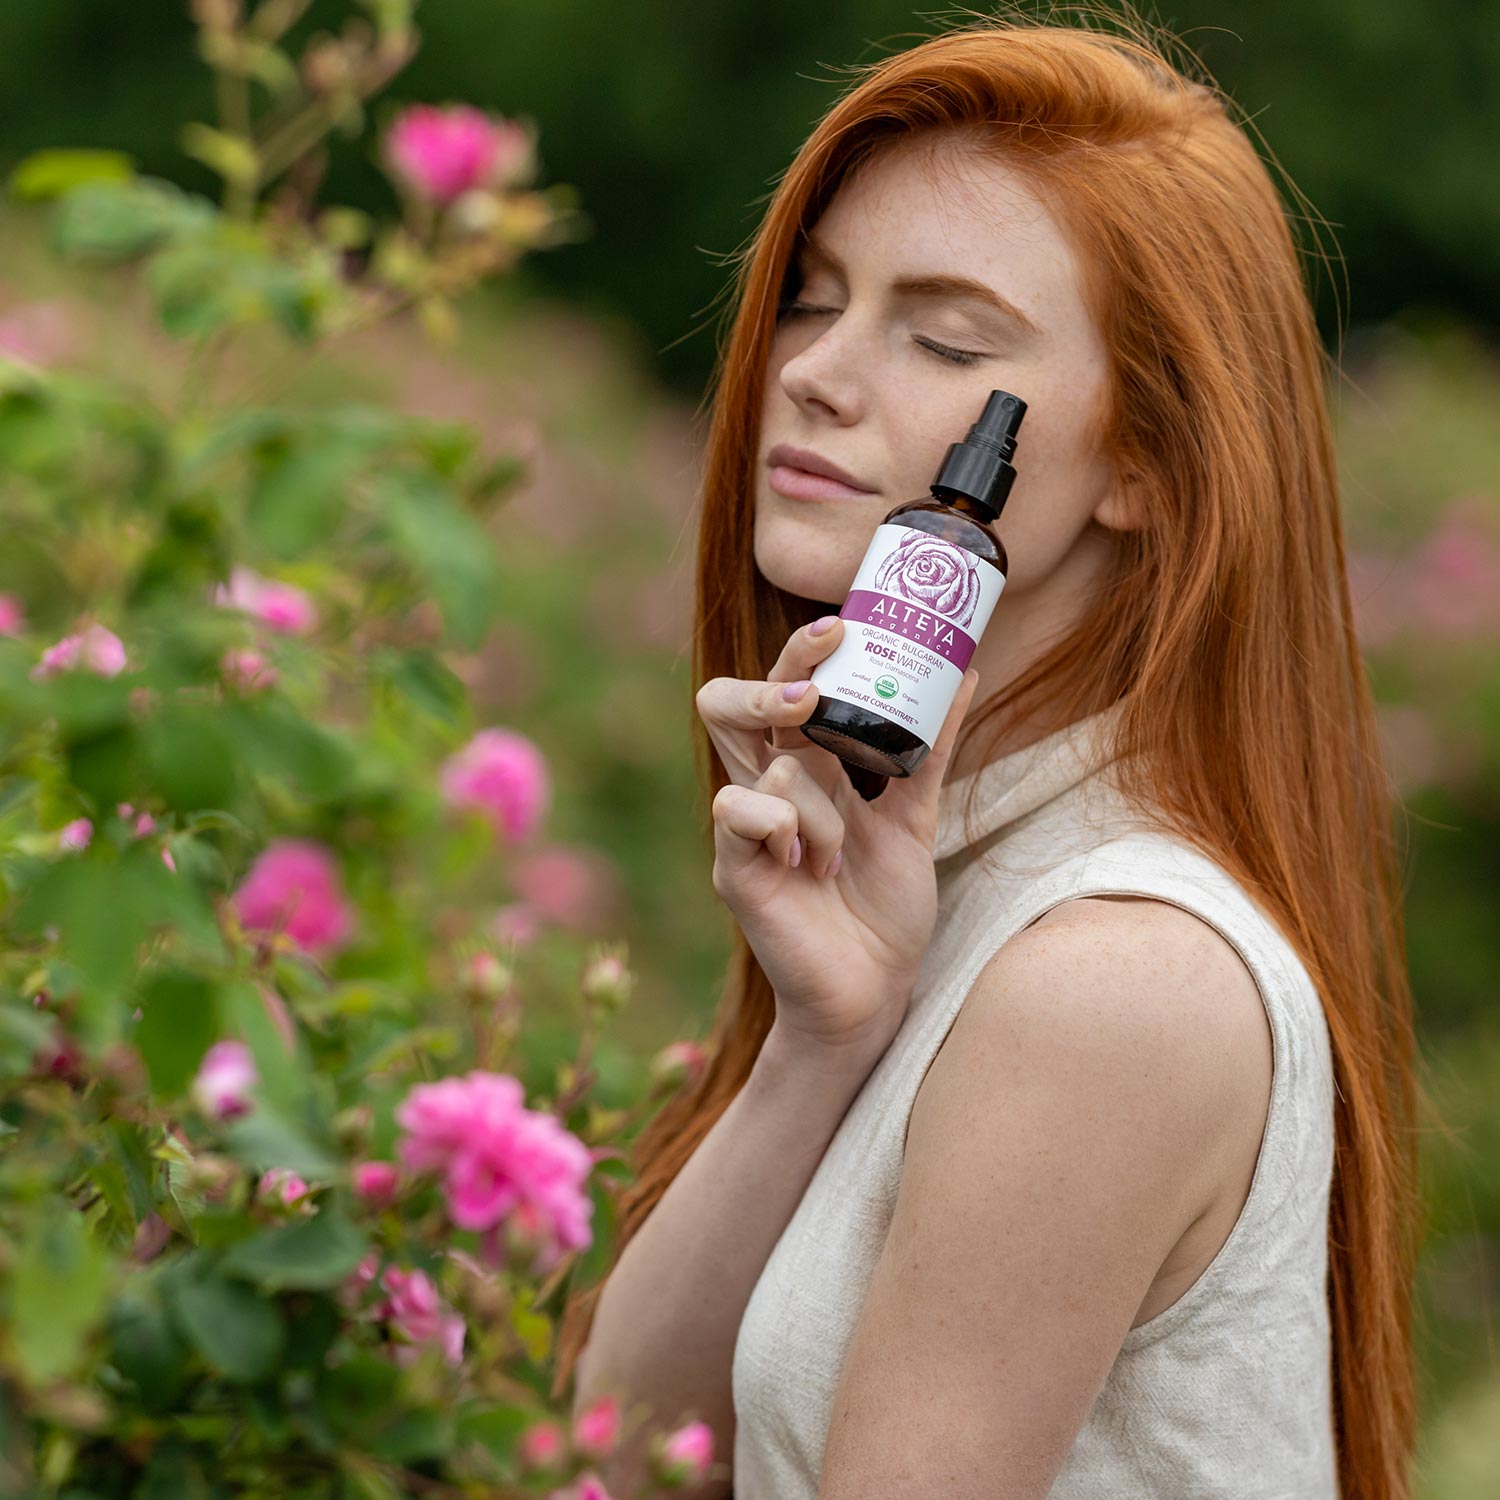 A woman with red hair is holding a bottle of Alteya Organics' Bulgarian Organic Rose Water – Glass Spray, providing hydration for her skincare routine.